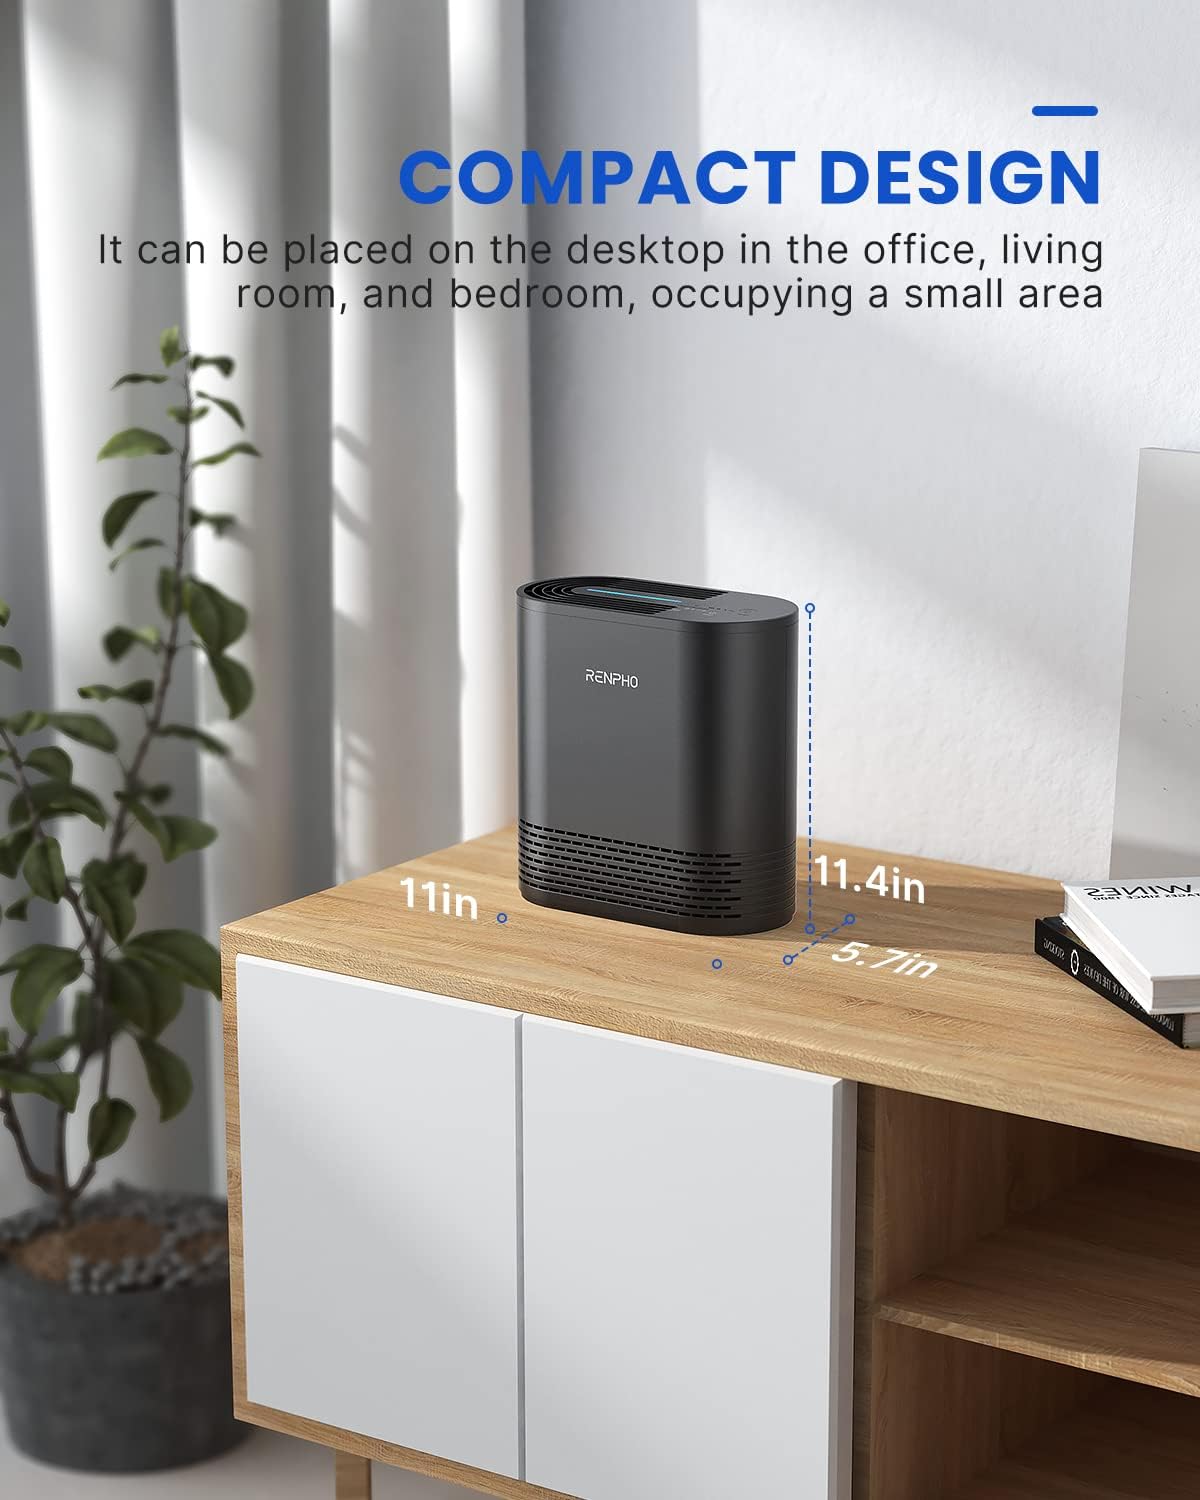 An Renpho Compact Air Purifier 068 Ozone Free sits on a wooden surface in a stylishly decorated room, promoting health with its compact design. It measures 11 inches high. Near the device, there's a small potted